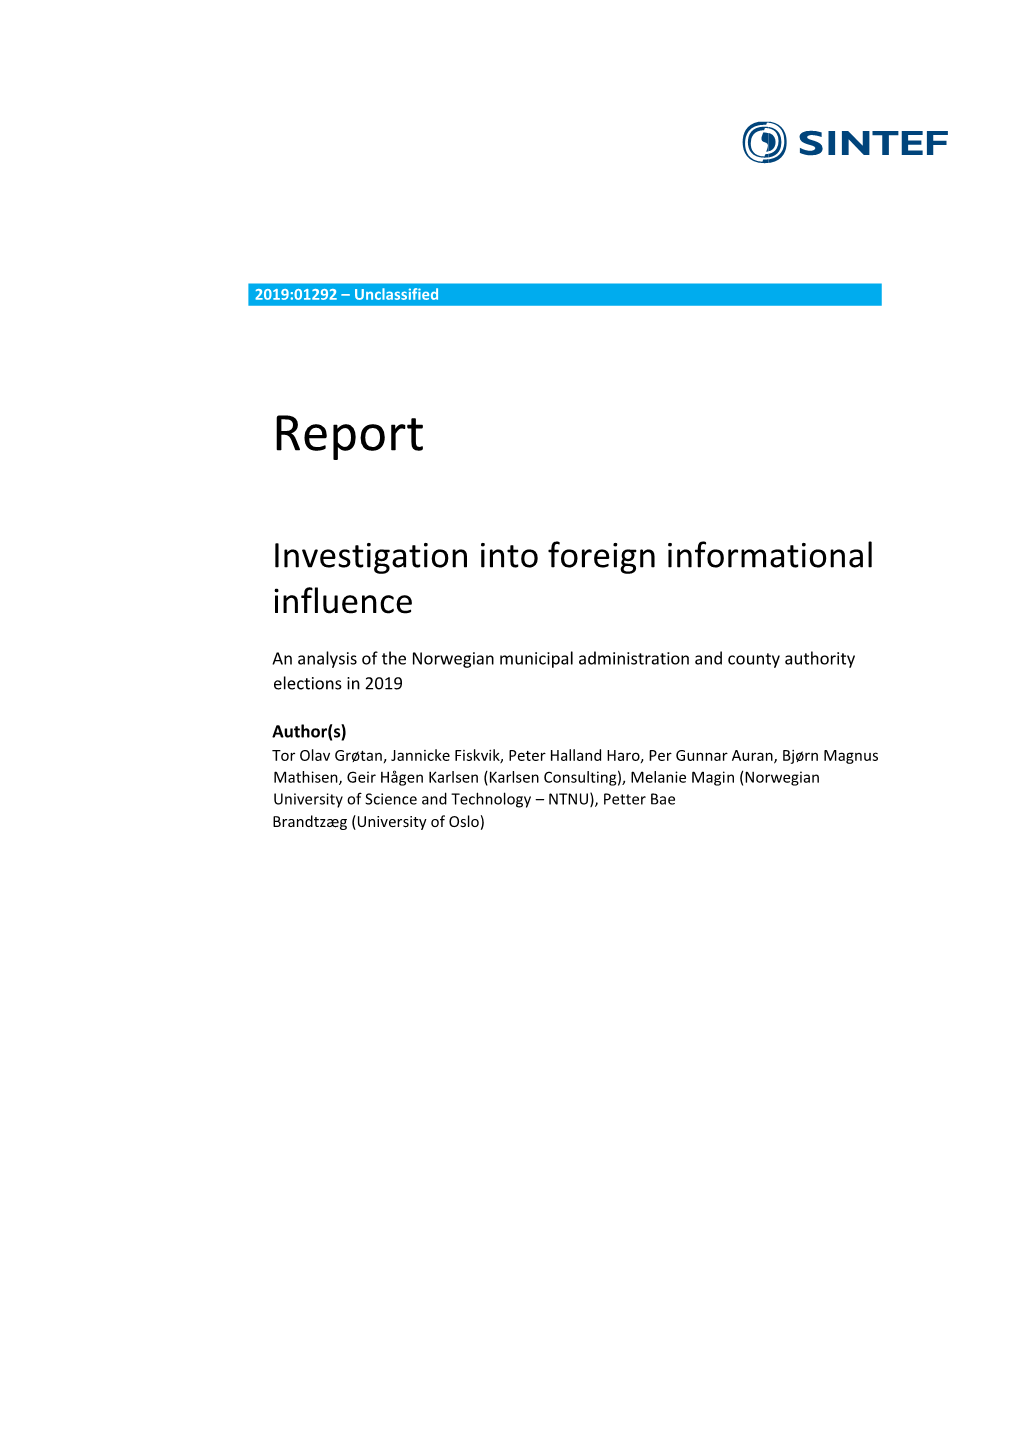 Report: Investigation Into Foreign Informational Influence